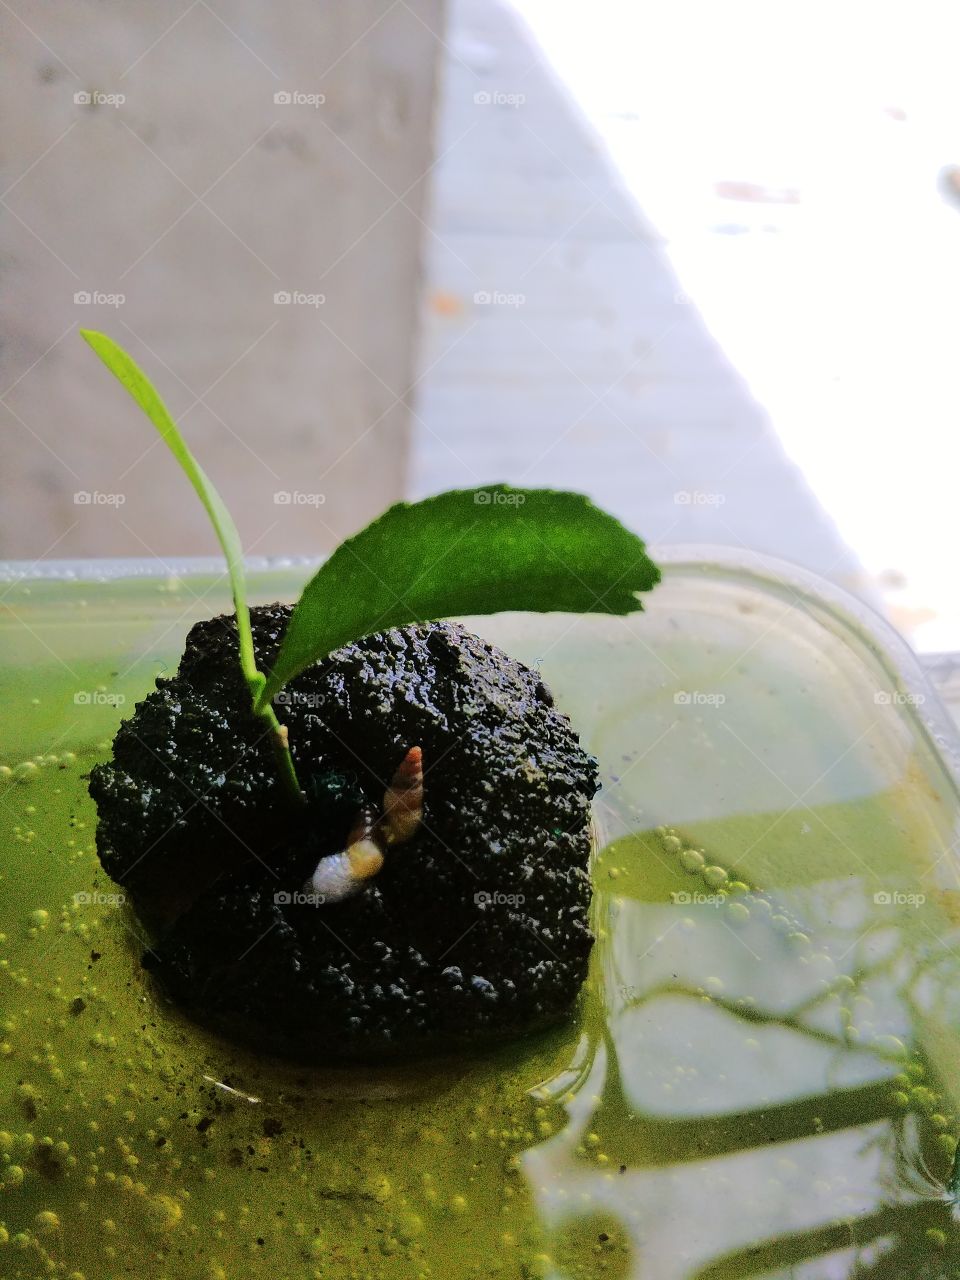 citrus plant with snails bubbles and green water